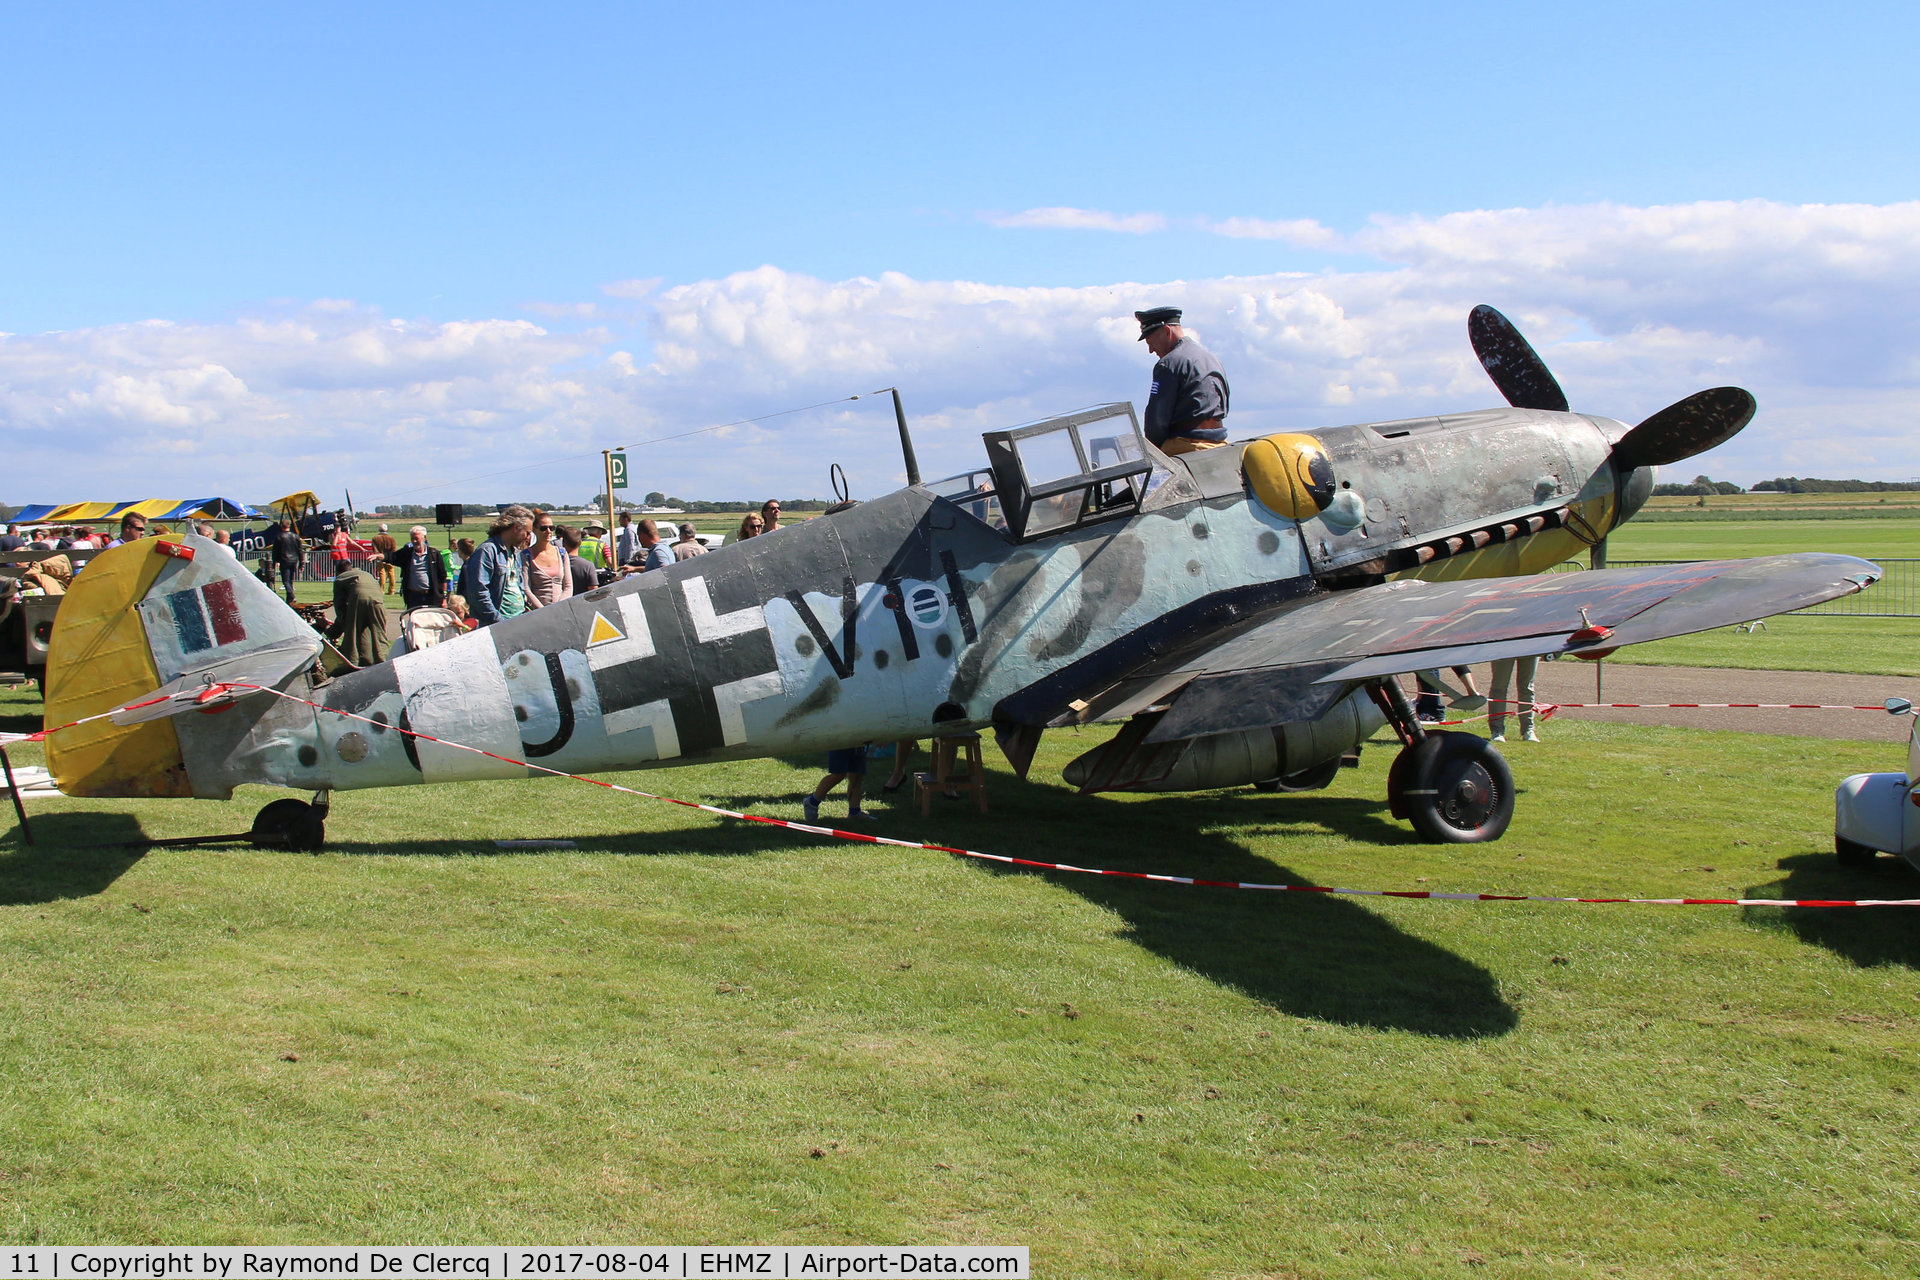 11, Messerschmitt Bf-109G-5 C/N 15343, Shot down by U.S. P-47 Thunderbolt near Moerkapelle,the Netherlands. Wreckage was recovered in 1978 and restored for static display by Vliegend Museum Seppe (EHSE).
Exhibited during the 